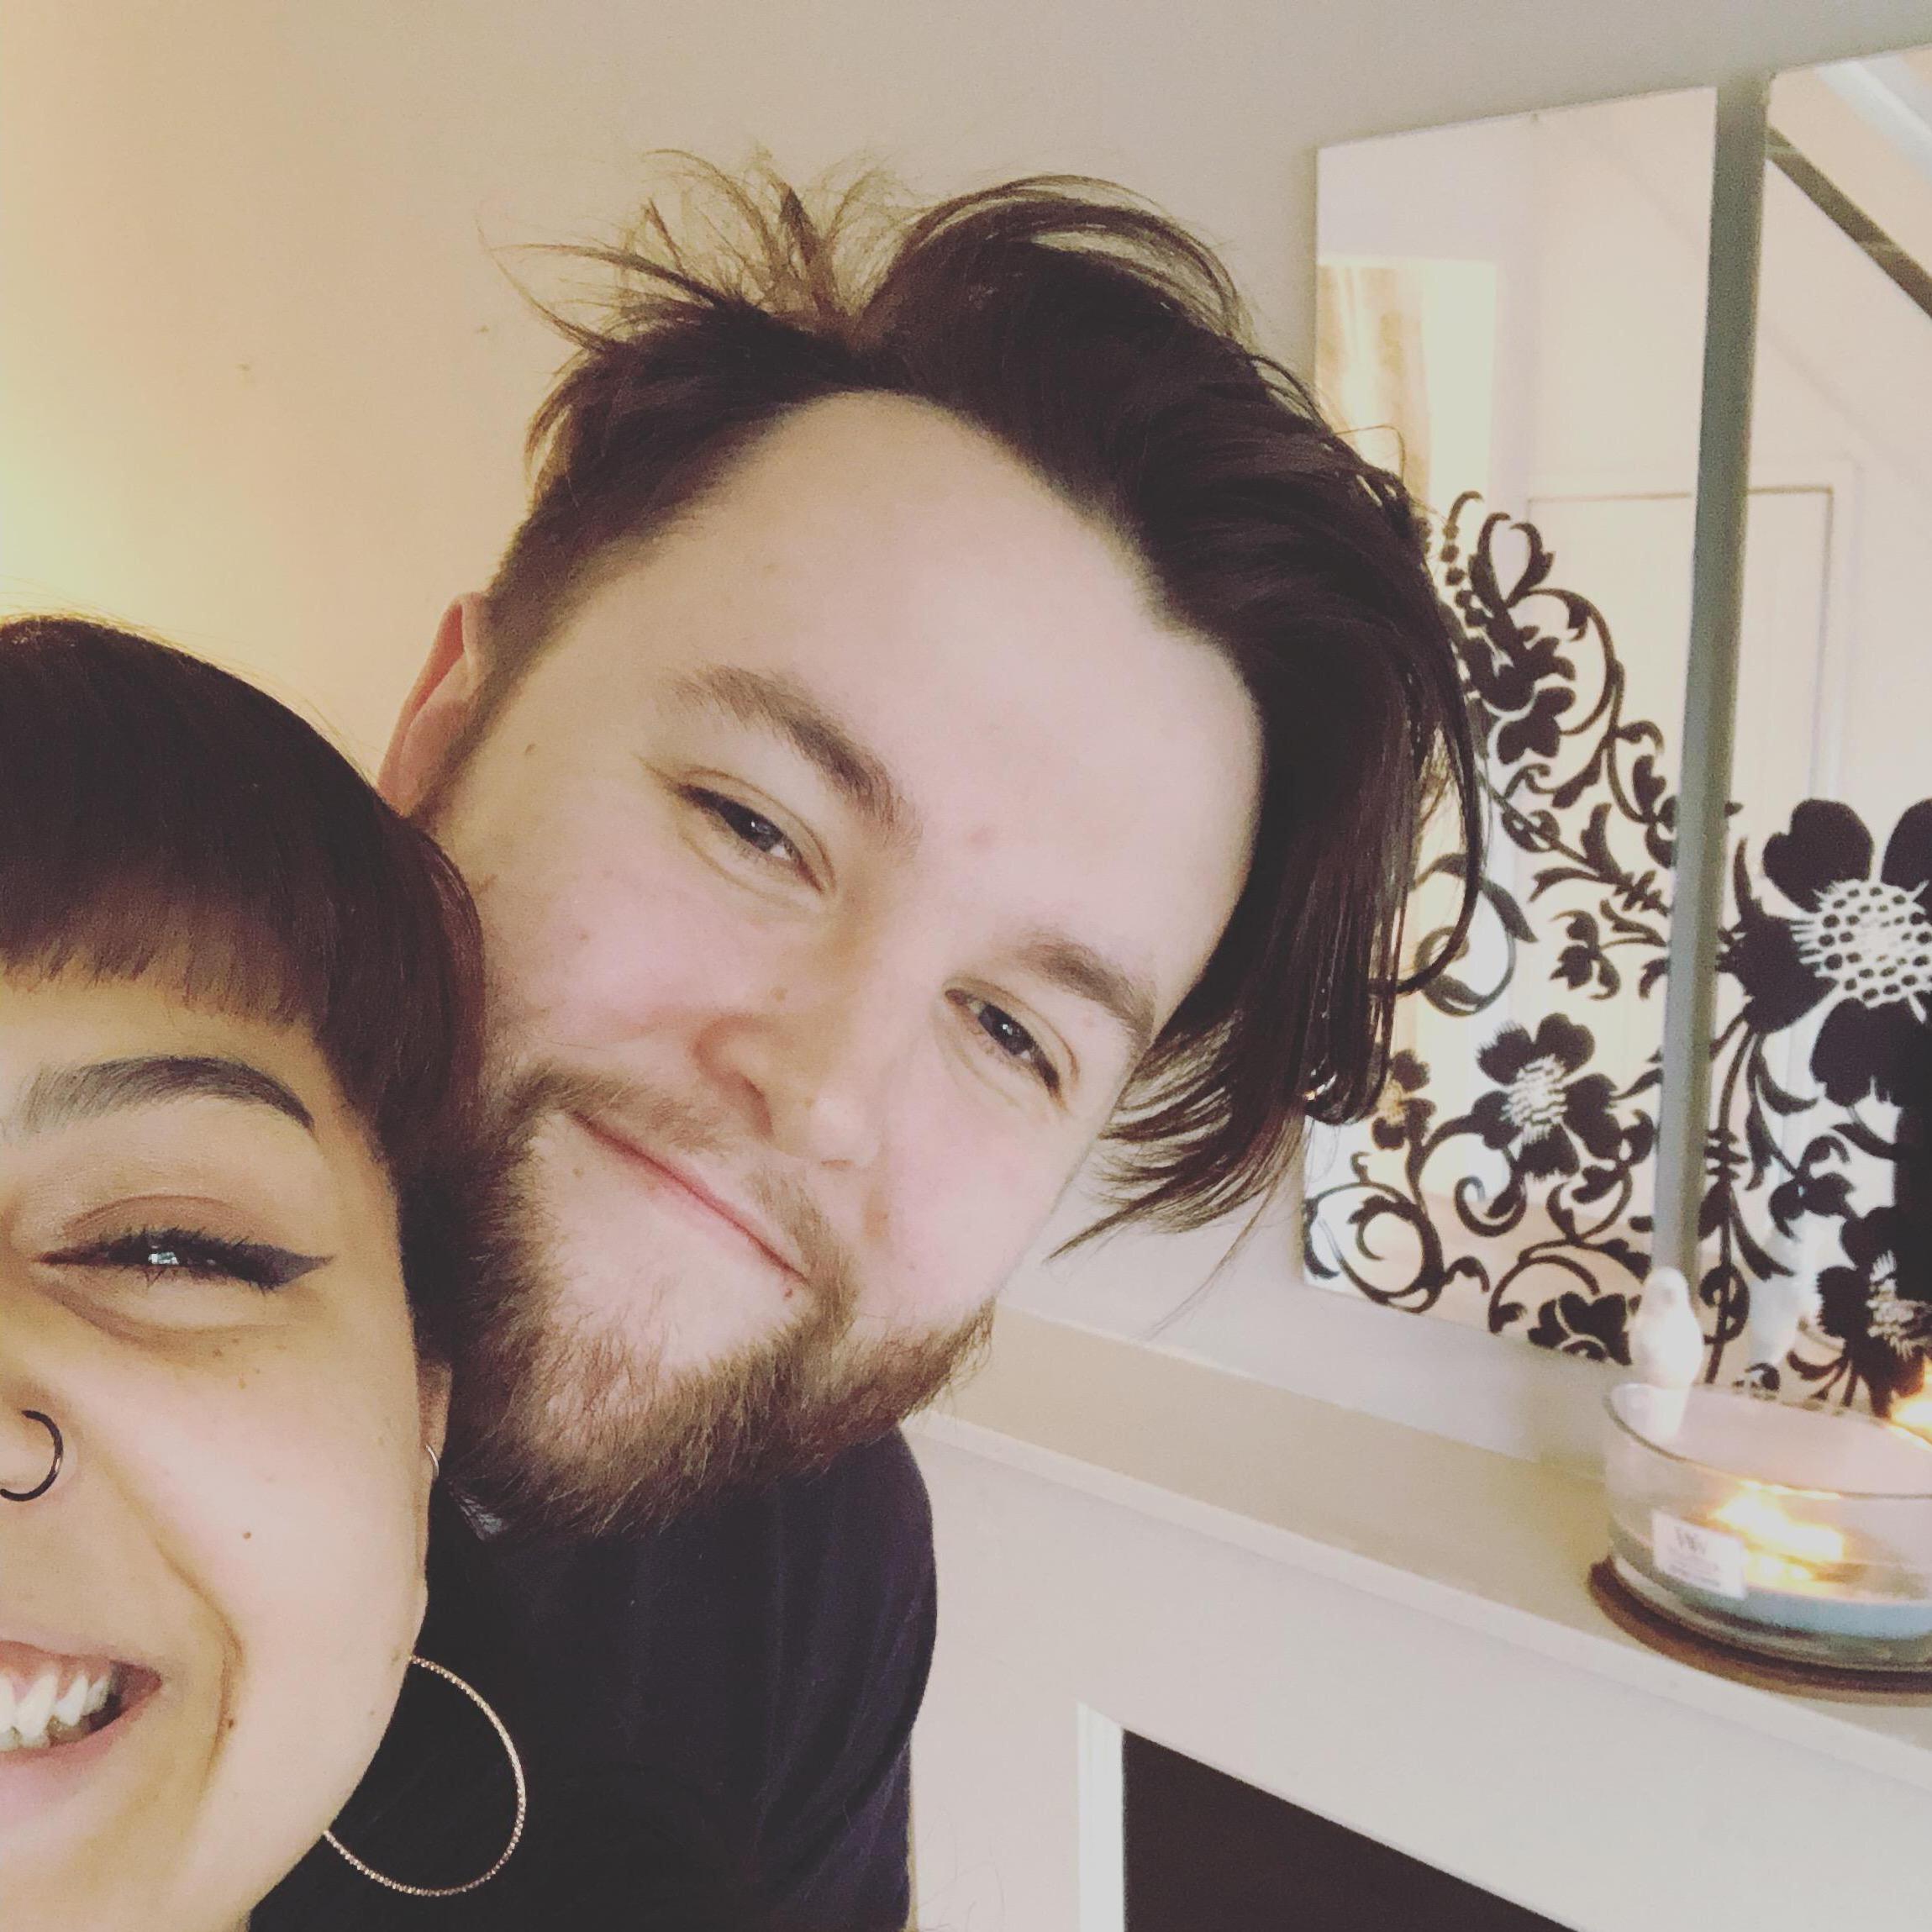 We moved into our own house :) 20th August 2019